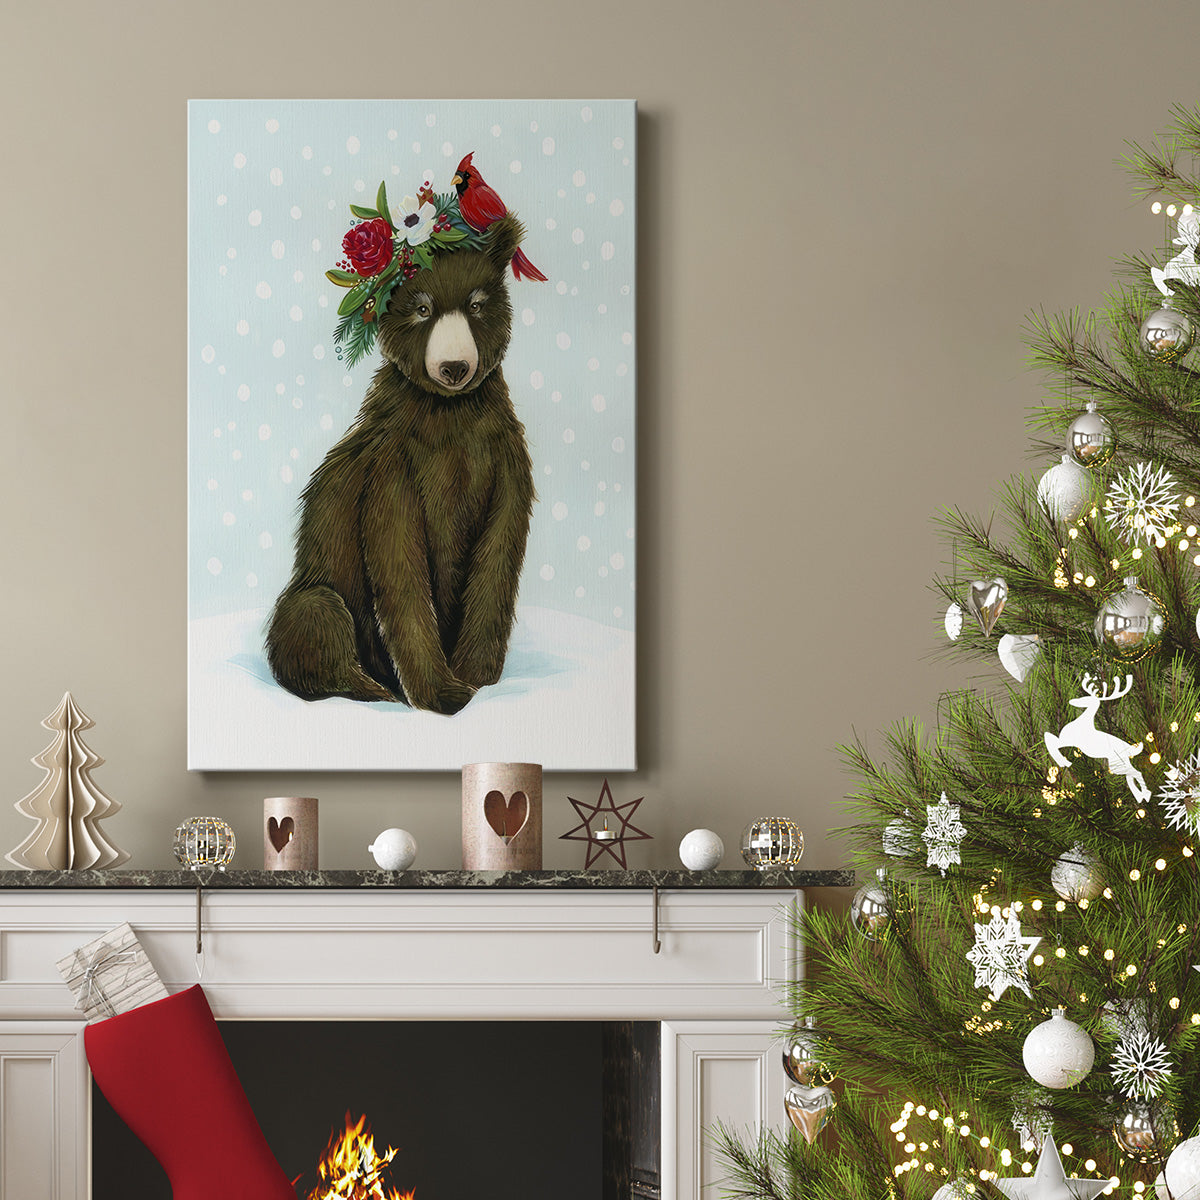 Winter Woodland Creatures with Cardinals I - Gallery Wrapped Canvas